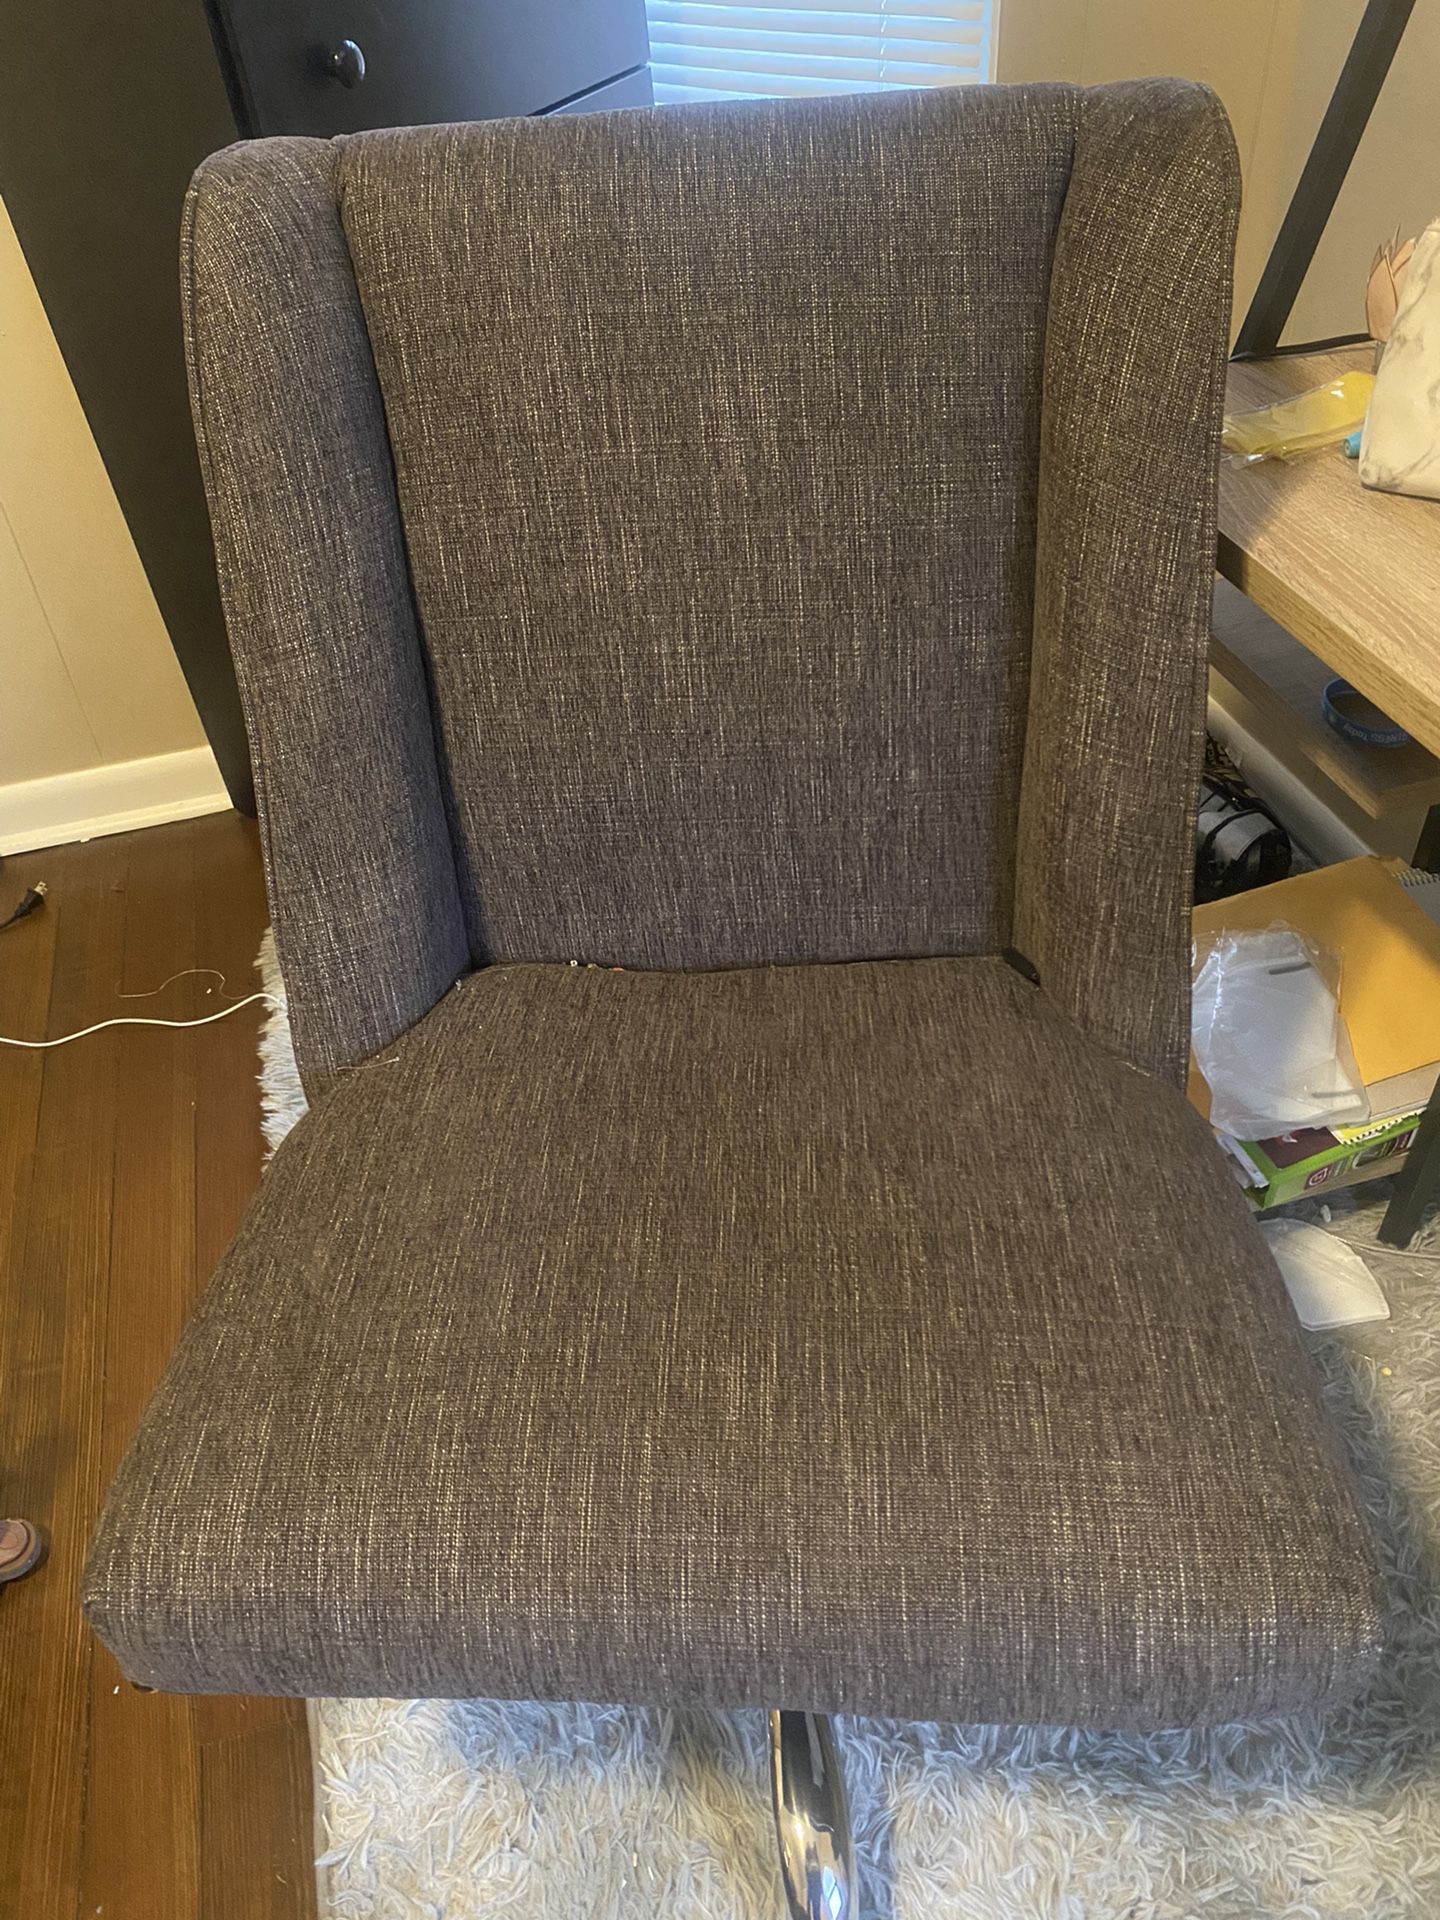 *BRAND NEW* Comfy Office Chair